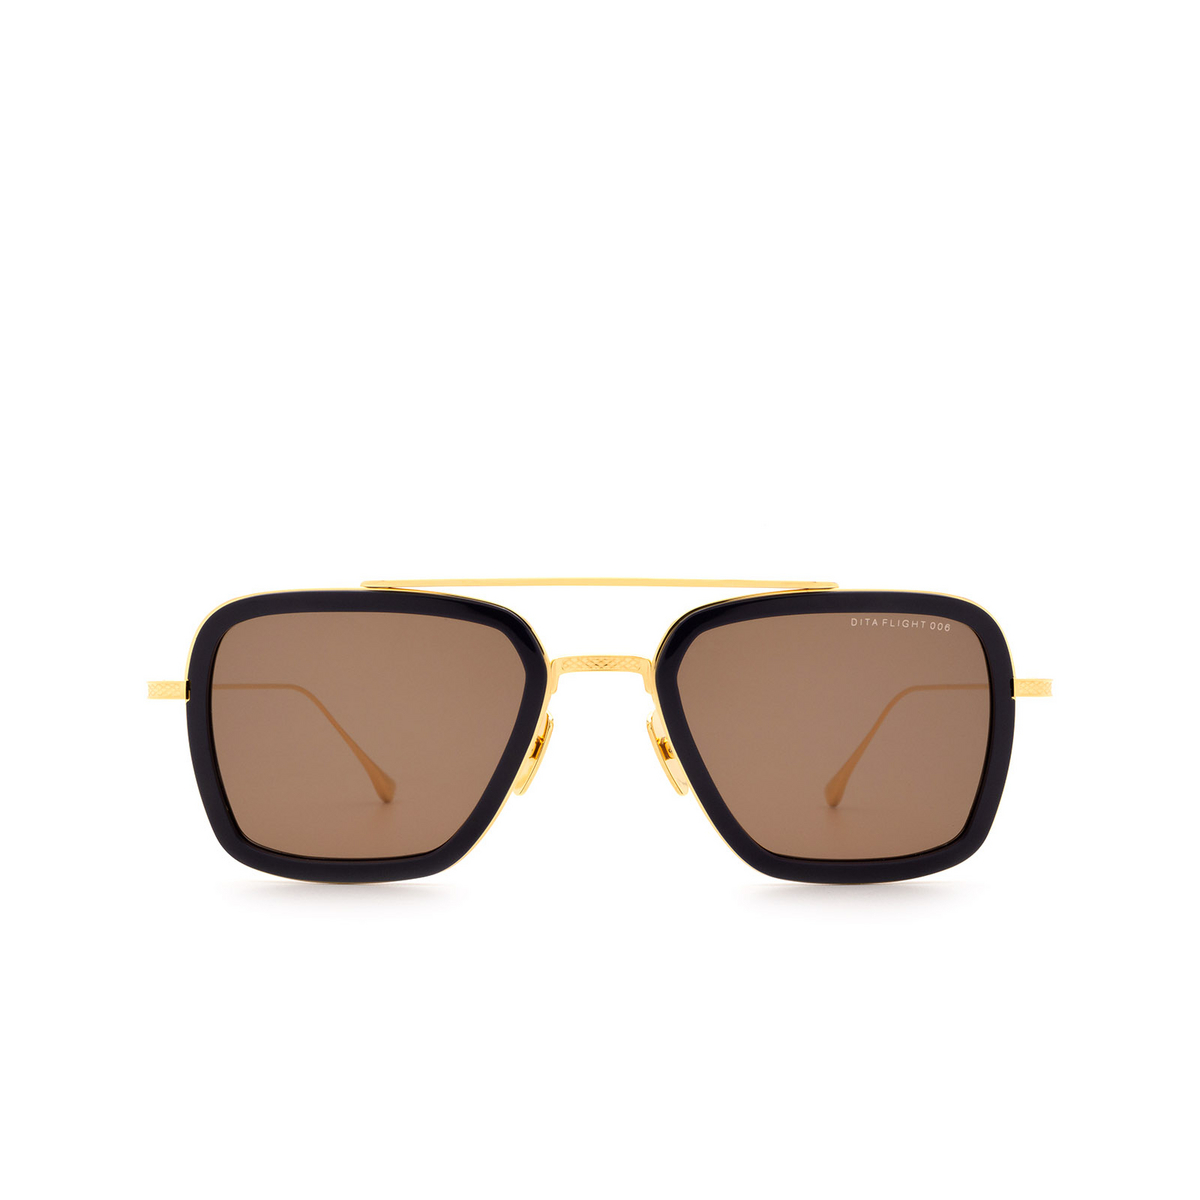 Dita® Aviator Sunglasses: Flight.006 7806-D color Navy & Gold Nvy-gld - front view.